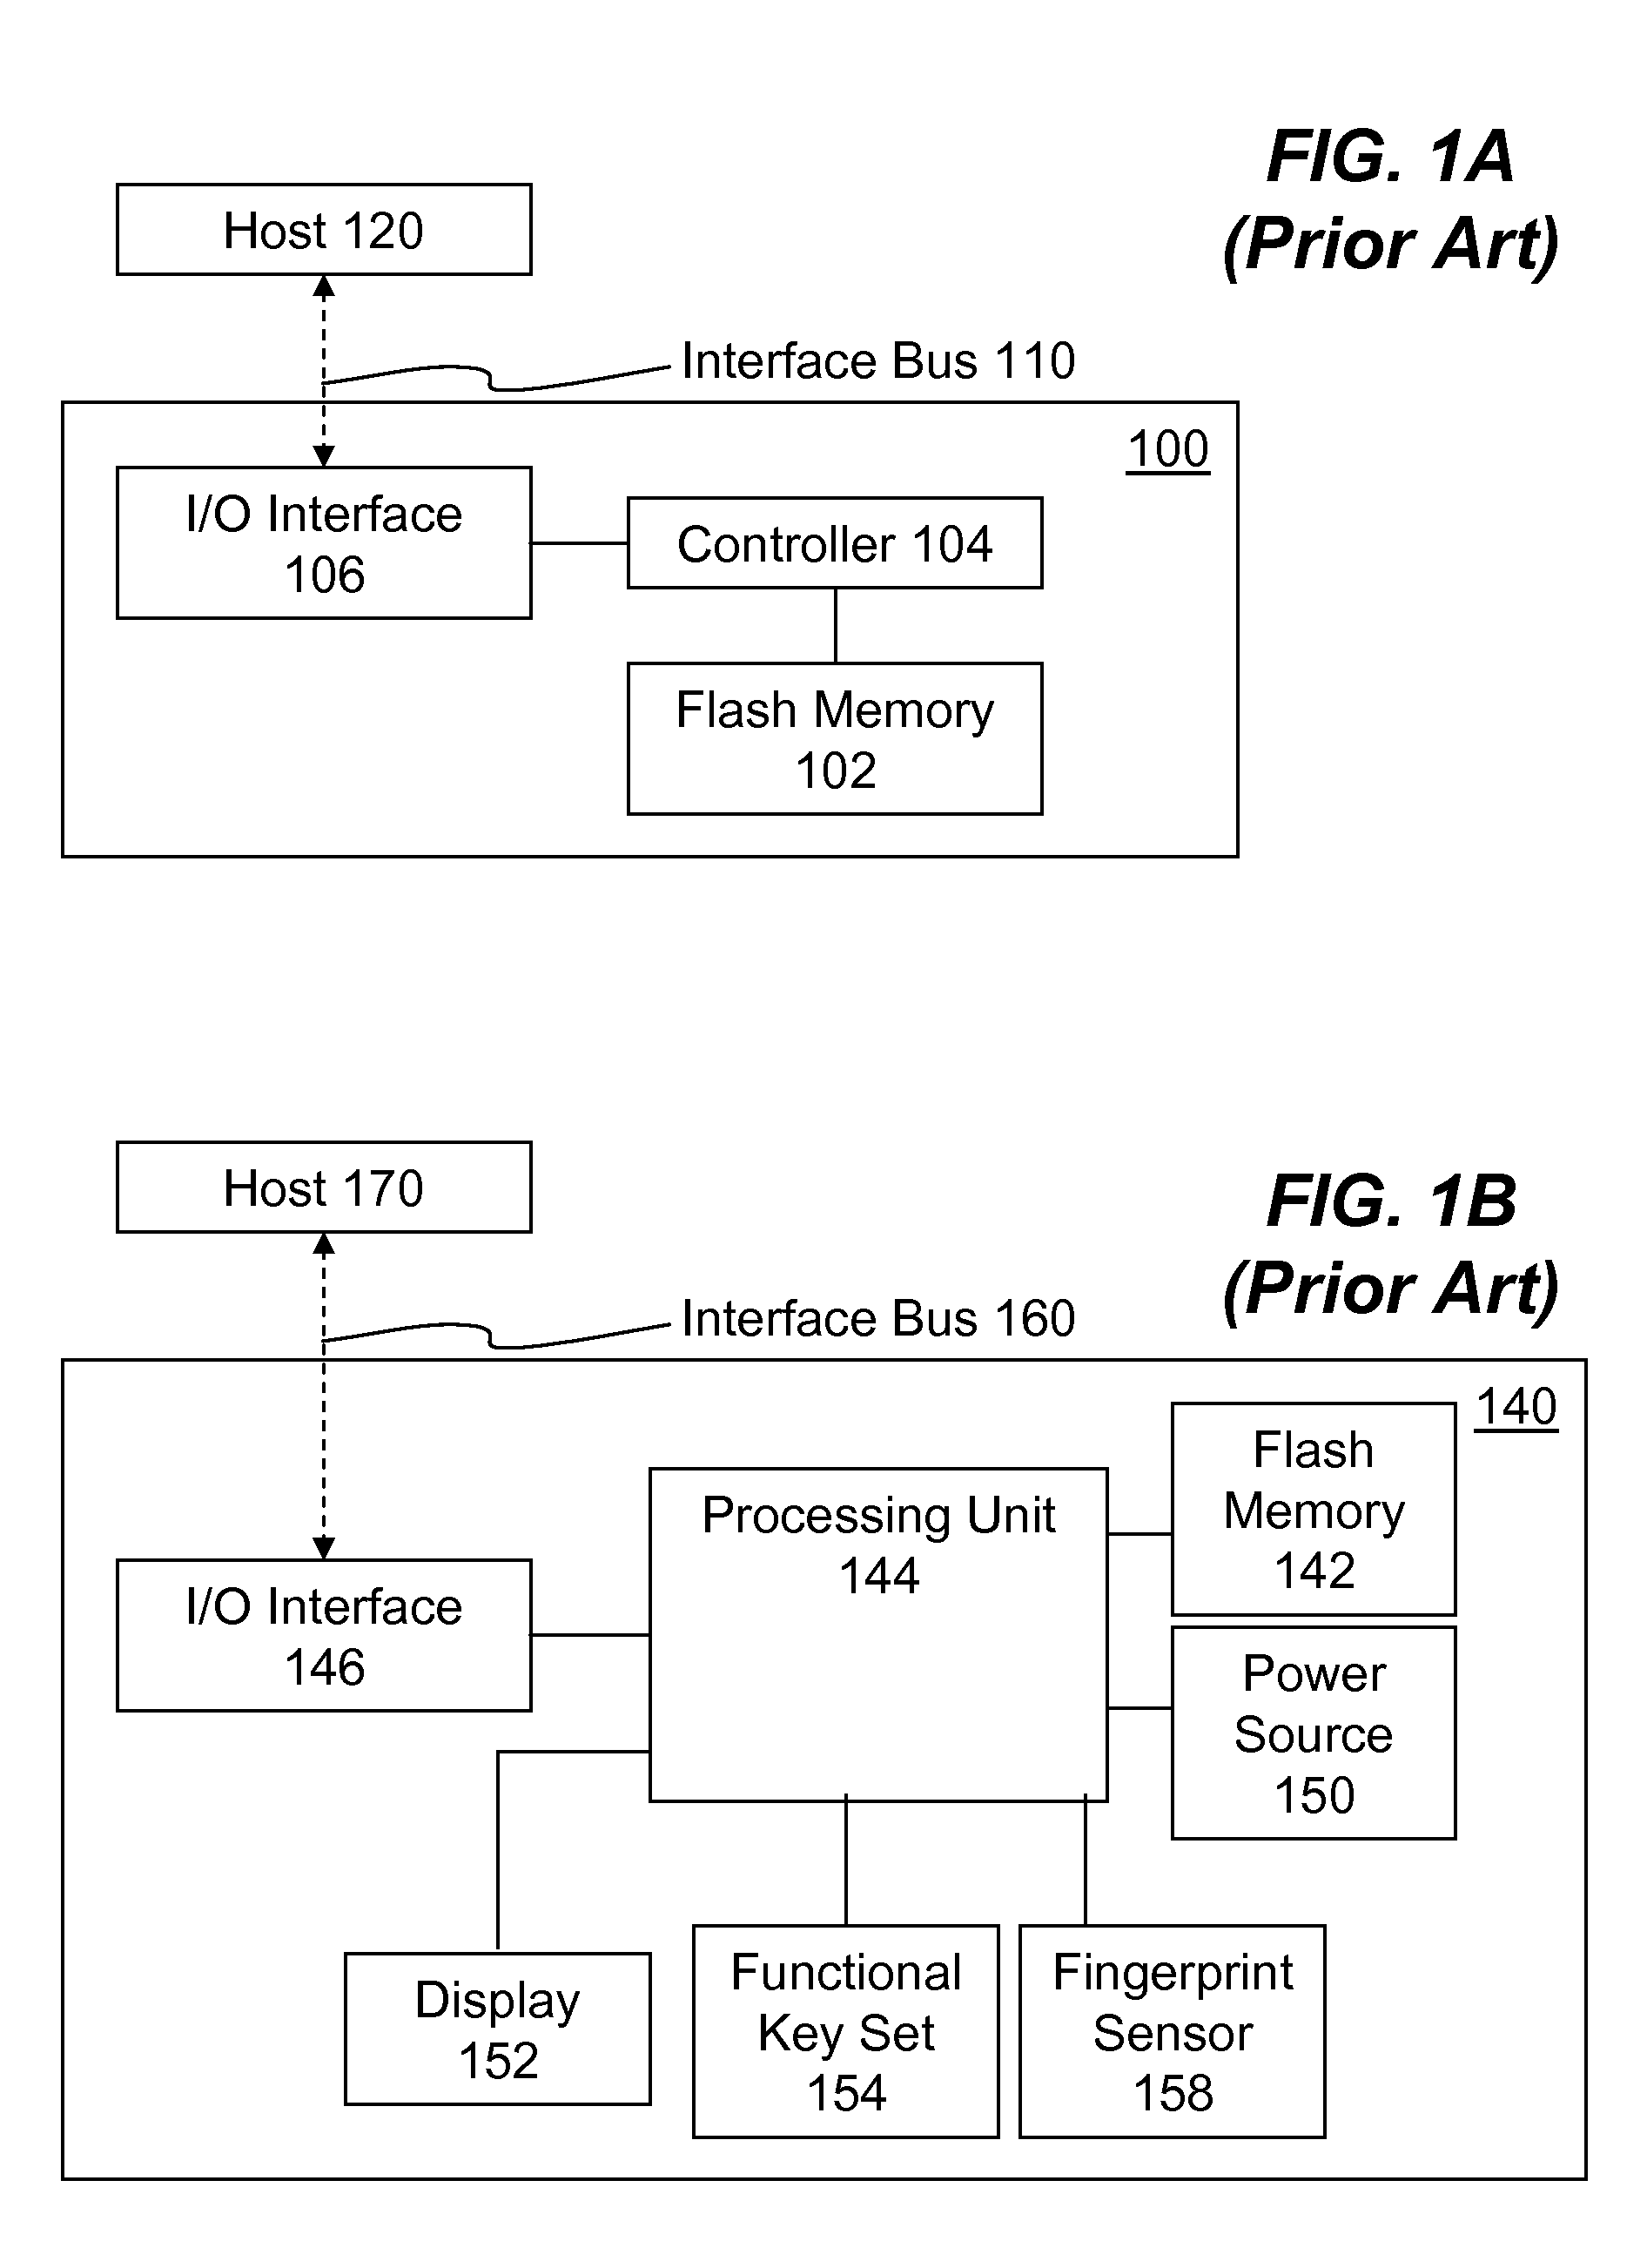 Portable Electronic Storage Devices with Hardware Security Based on Advanced Encryption Standard